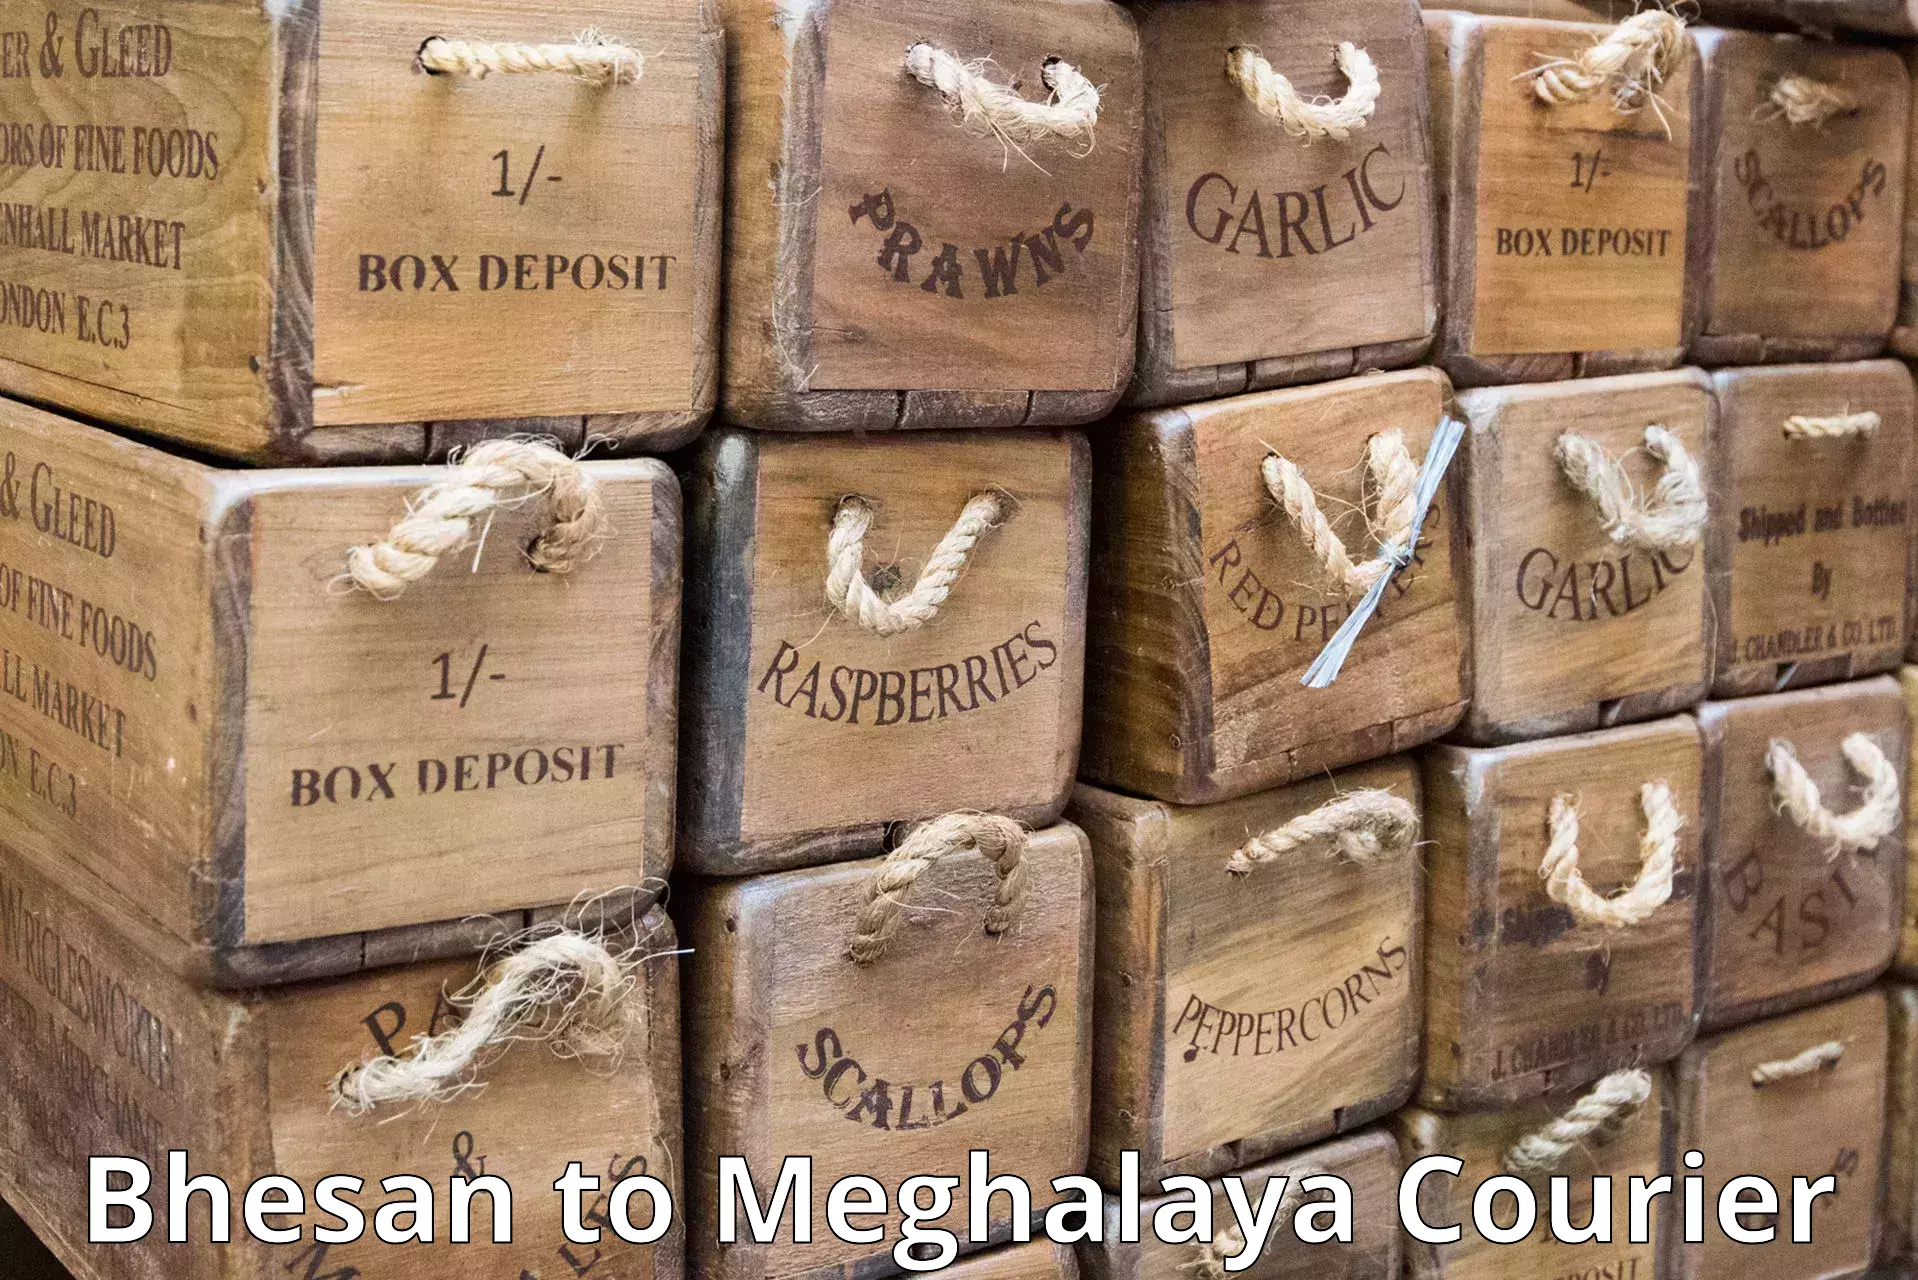 Local delivery service Bhesan to Meghalaya